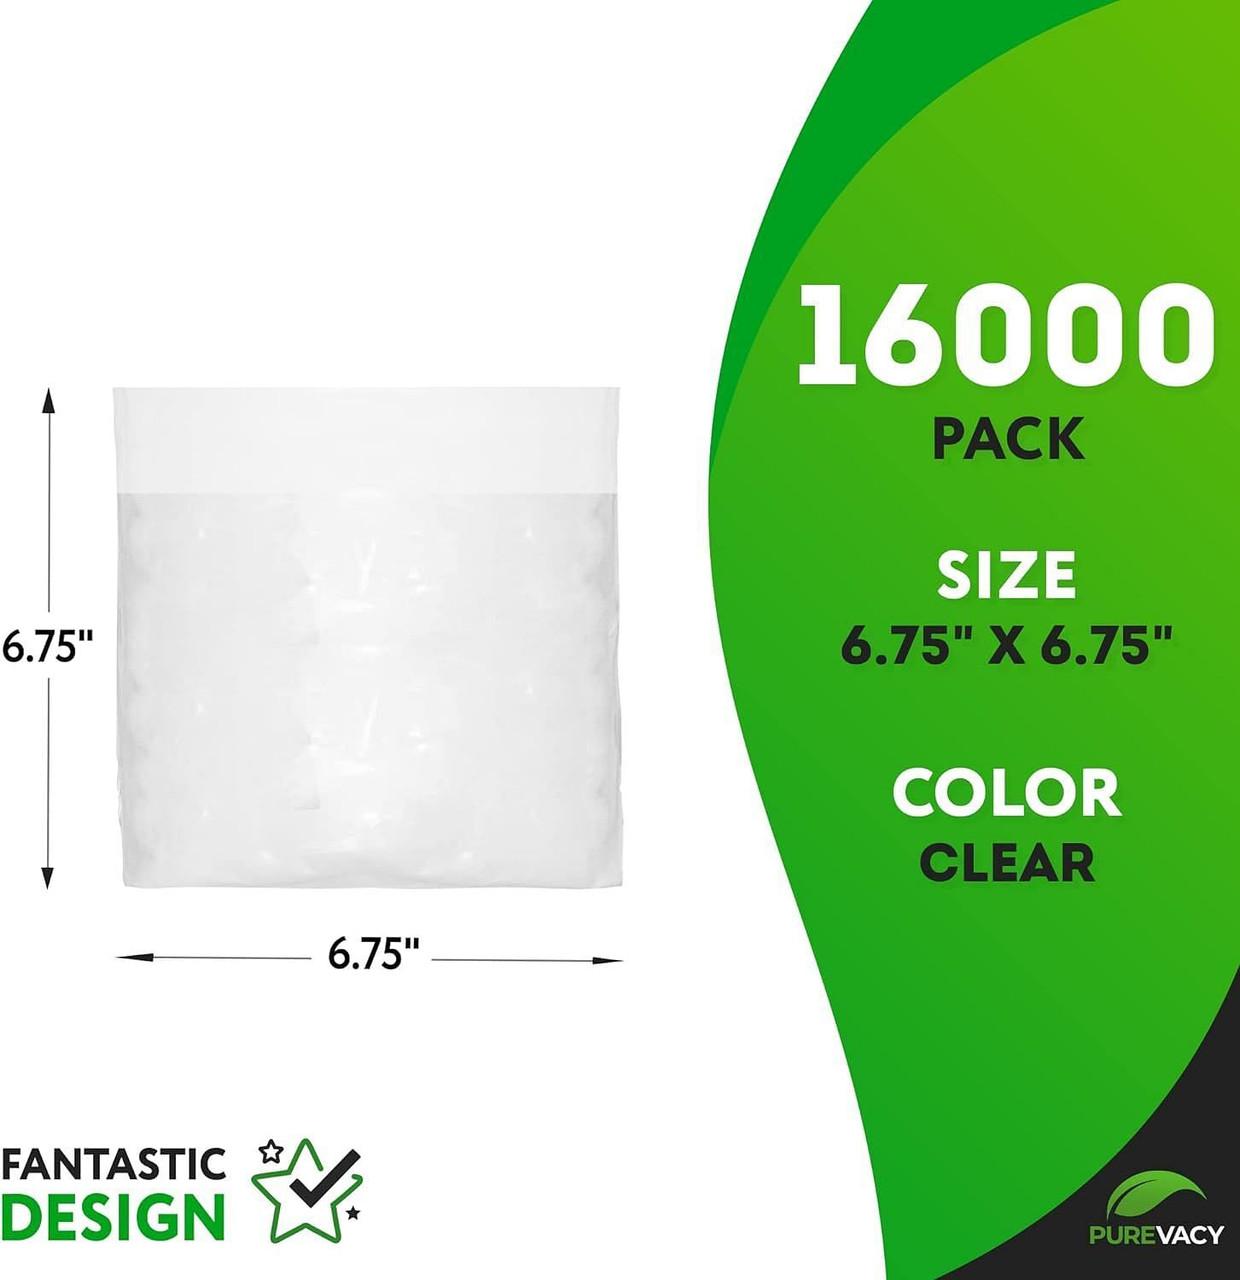 Fold Top Plastic Sandwich Bags 6.75" x 6.75", Pack of 16000 Clear Plastic Sandwich Baggies with Fli